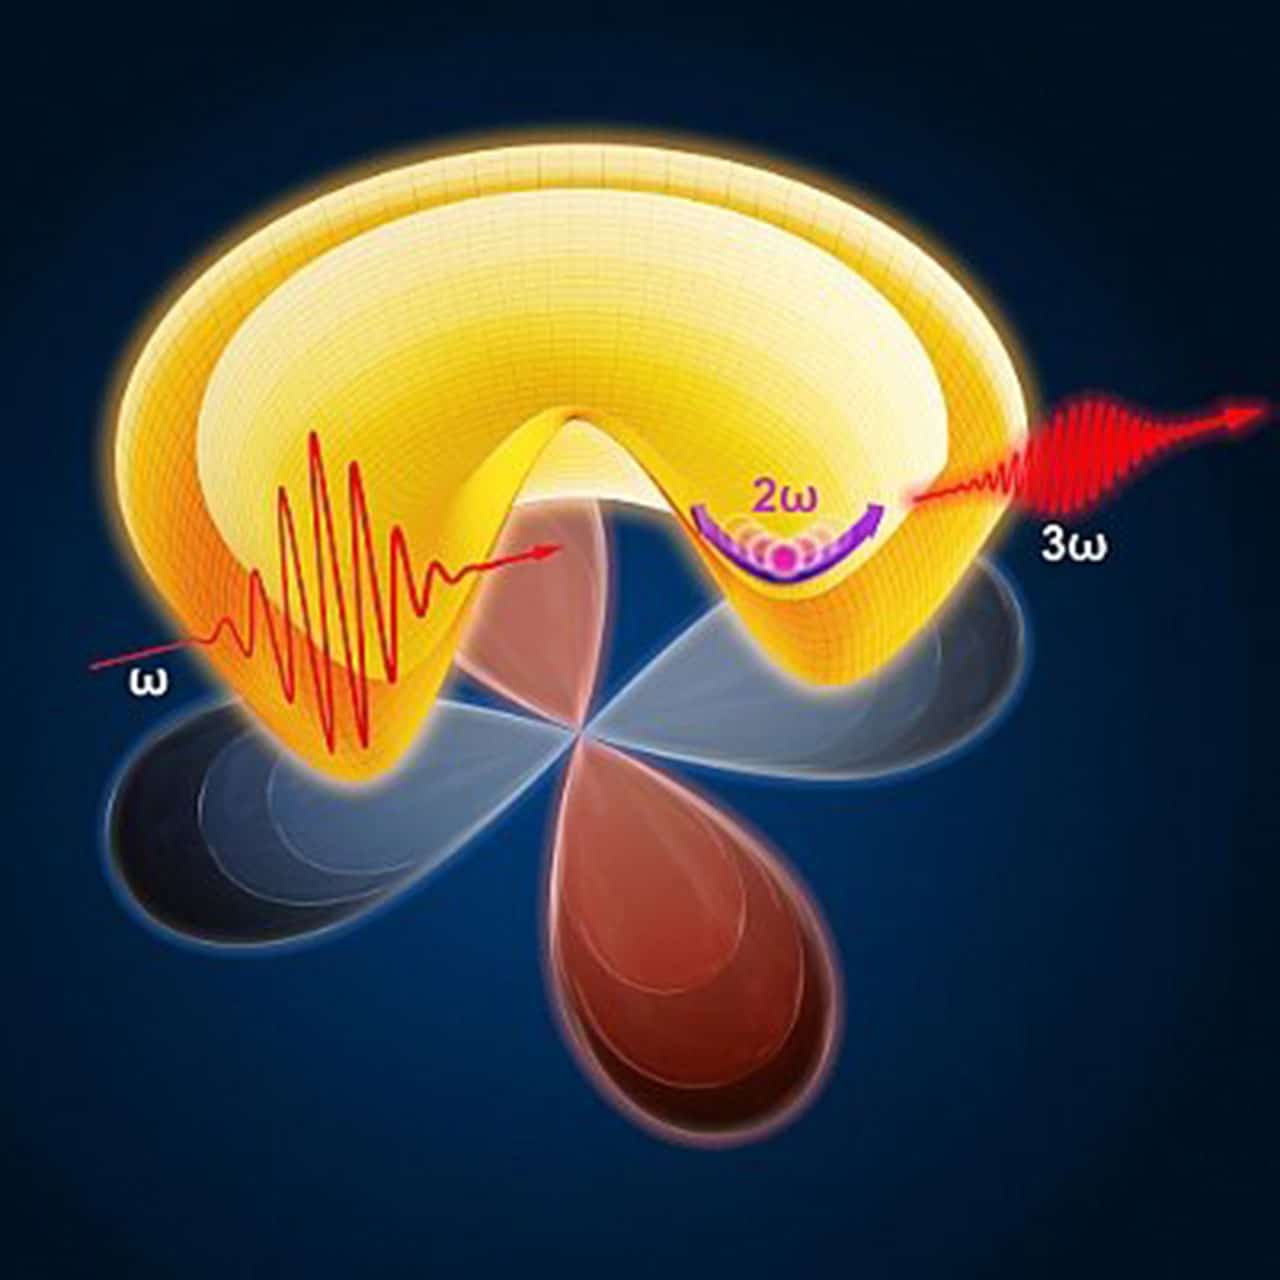 Deciphering previously invisible dynamics in superconductors -- Higgs spectroscopy could make this possible: Using cuprates, a high-temperature superconductor, as an example, an international team of researchers has been able to demonstrate the potential of the new measurement method. By applying a strong terahertz pulse (frequency ω), they stimulated and continuously maintained Higgs oscillations in the material (2ω). Driving the system resonant to the Eigenfrequency of the Higgs oscillations in turn leads to the generation of characteristic terahertz light with tripled frequency (3ω). Credit: HZDR / Juniks Deciphering previously invisible dynamics in superconductors – Higgs spectroscopy could make this possible: Using cuprates, a high-temperature superconductor, as an example, an international team of researchers has been able to demonstrate the potential of the new measurement method. By applying a strong terahertz pulse (frequency ω), they stimulated and continuously maintained Higgs oscillations in the material (2ω). Driving the system resonant to the Eigenfrequency of the Higgs oscillations in turn leads to the generation of characteristic terahertz light with tripled frequency (3ω). Credit: HZDR/Juniks